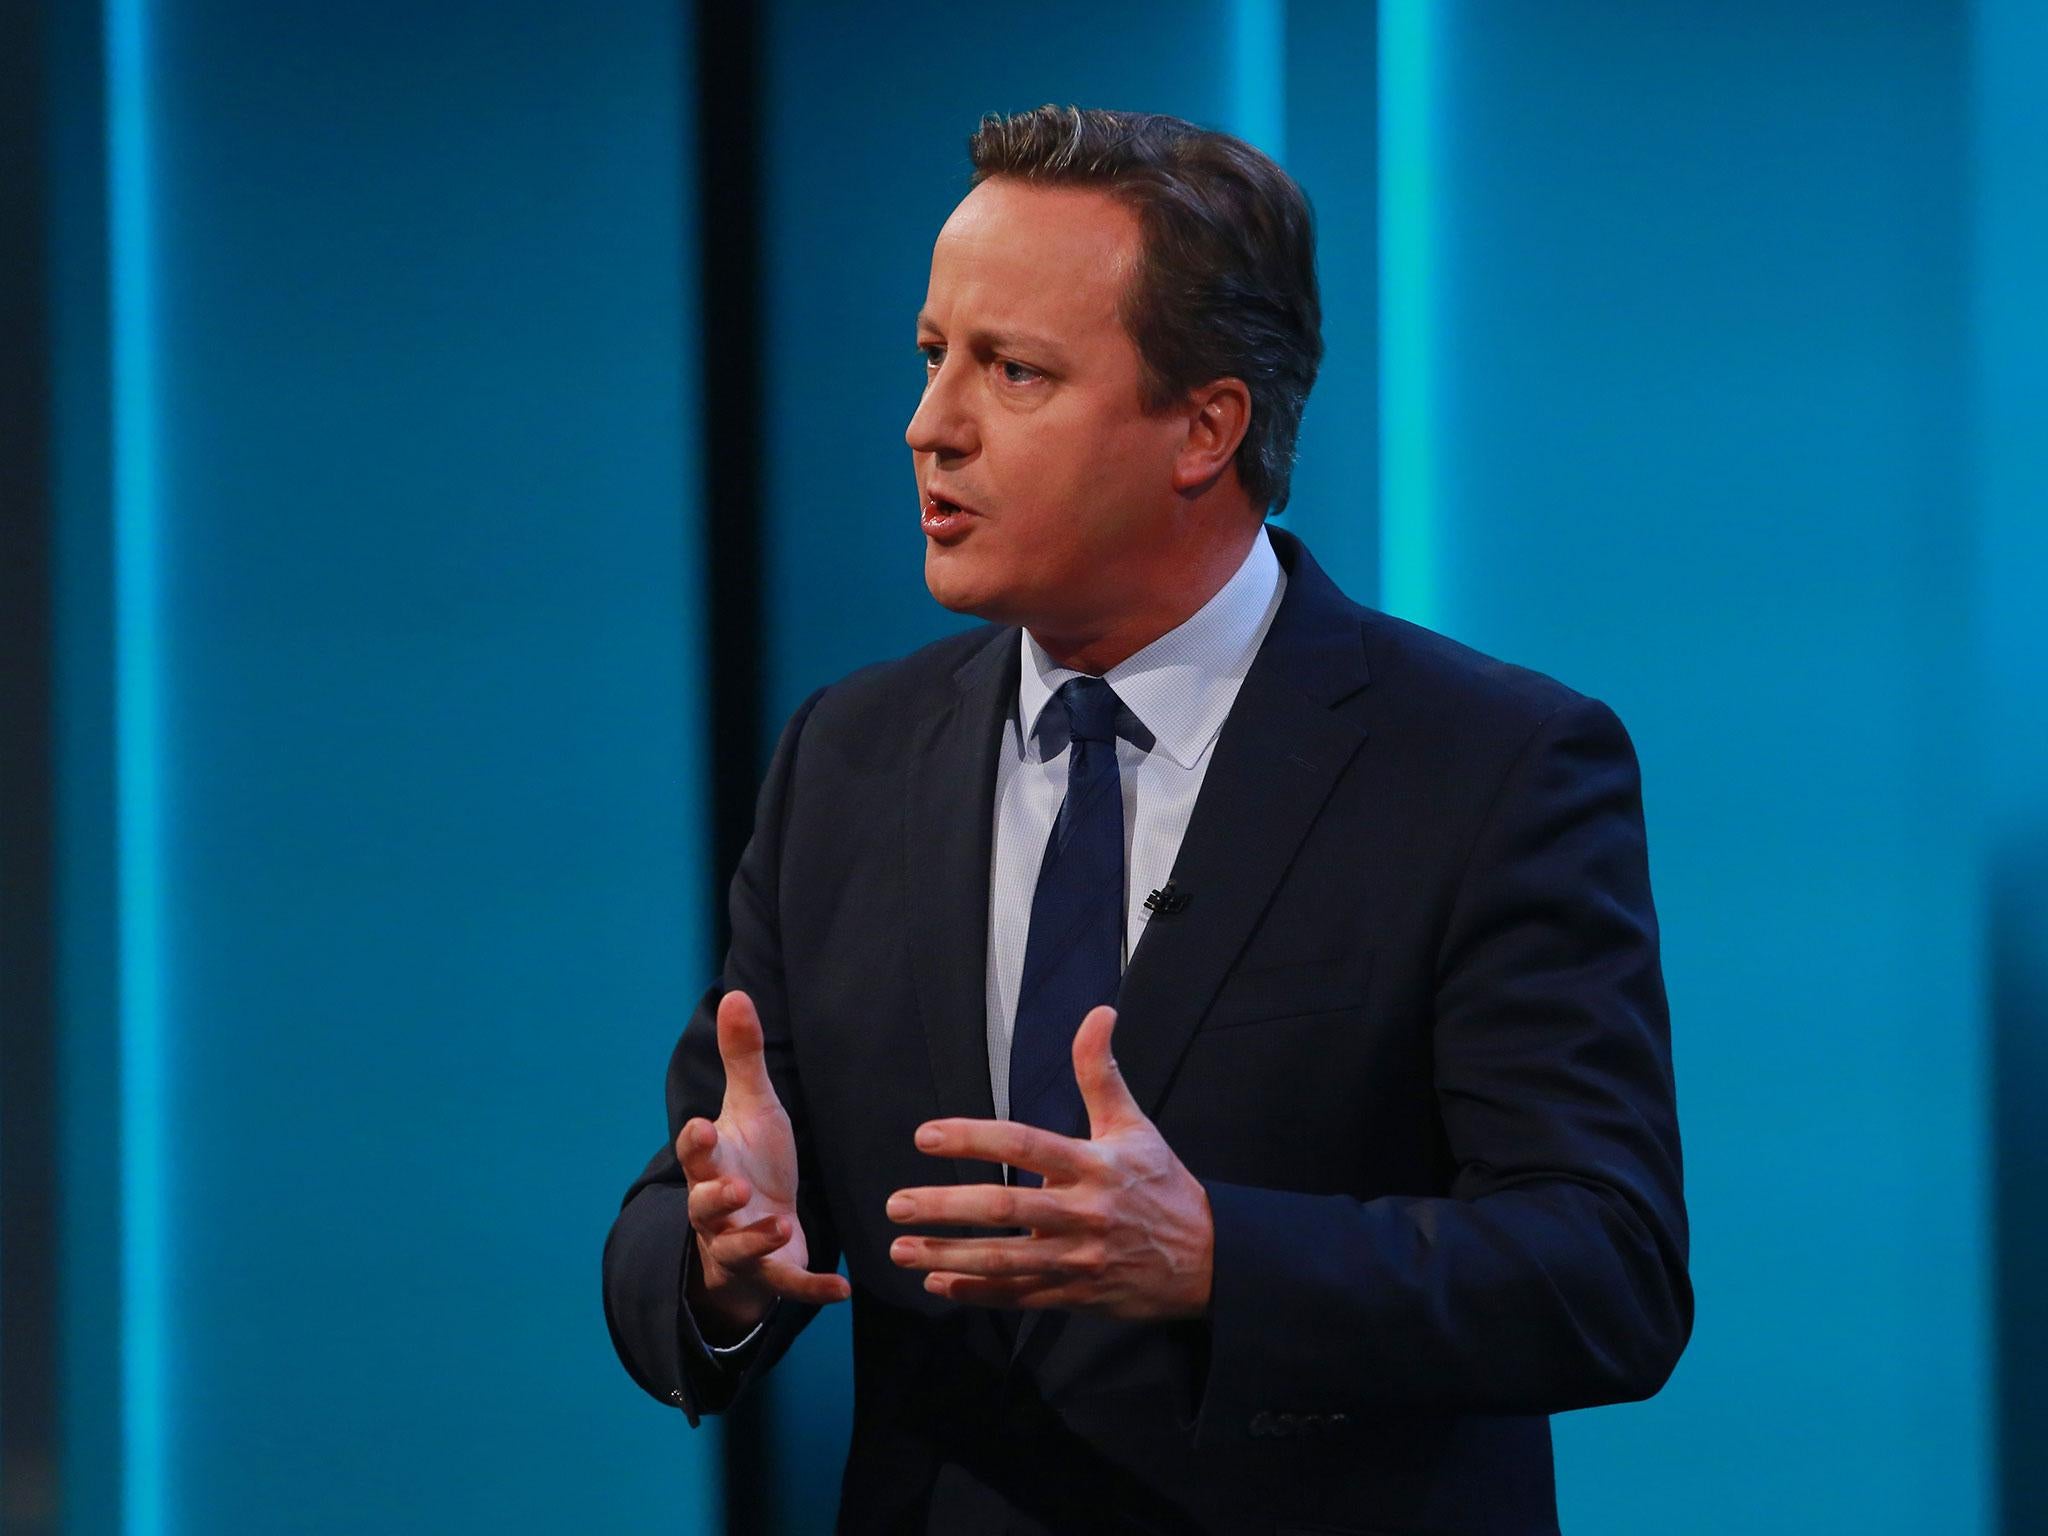 David Cameron faces questions from the studio audience